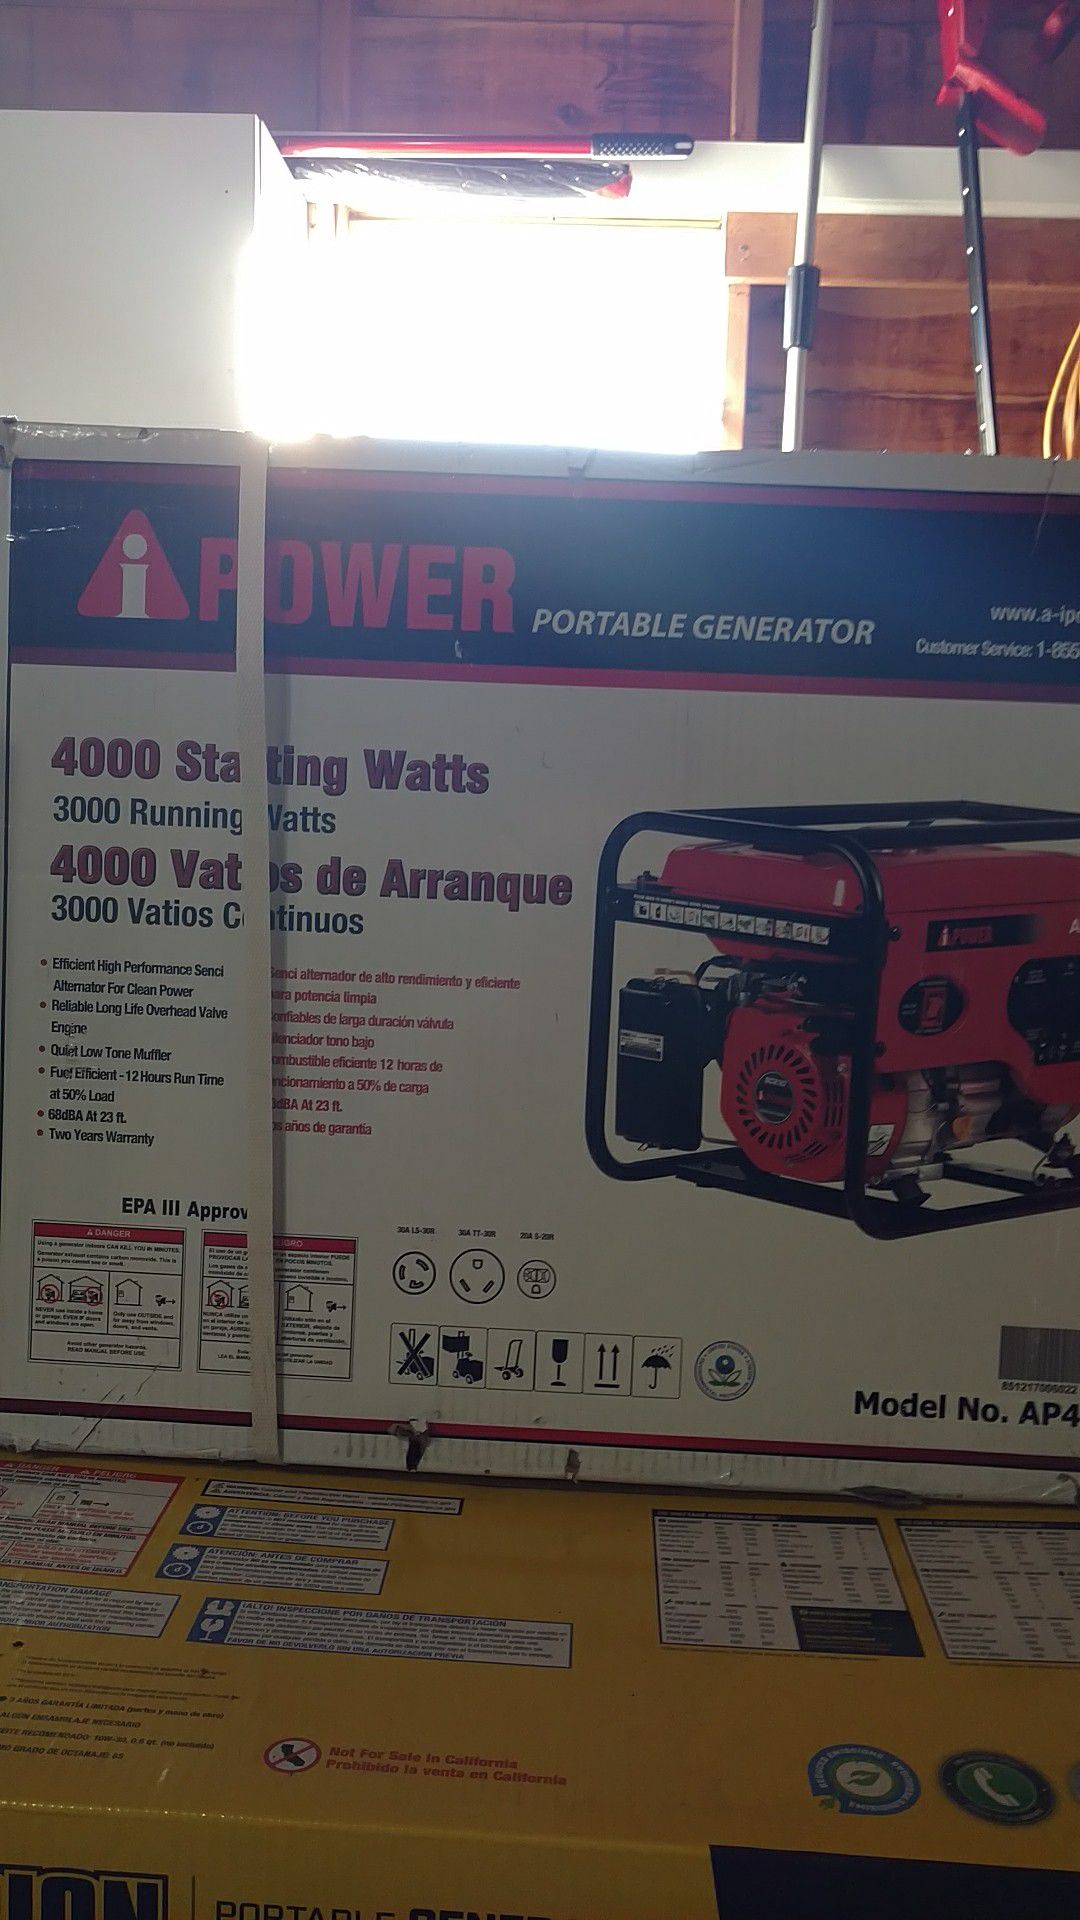 New! A-iPower 4,000 Watt Gasoline Powered Portable Generator with Manual Start (Includes Wheel Kit & Handle)